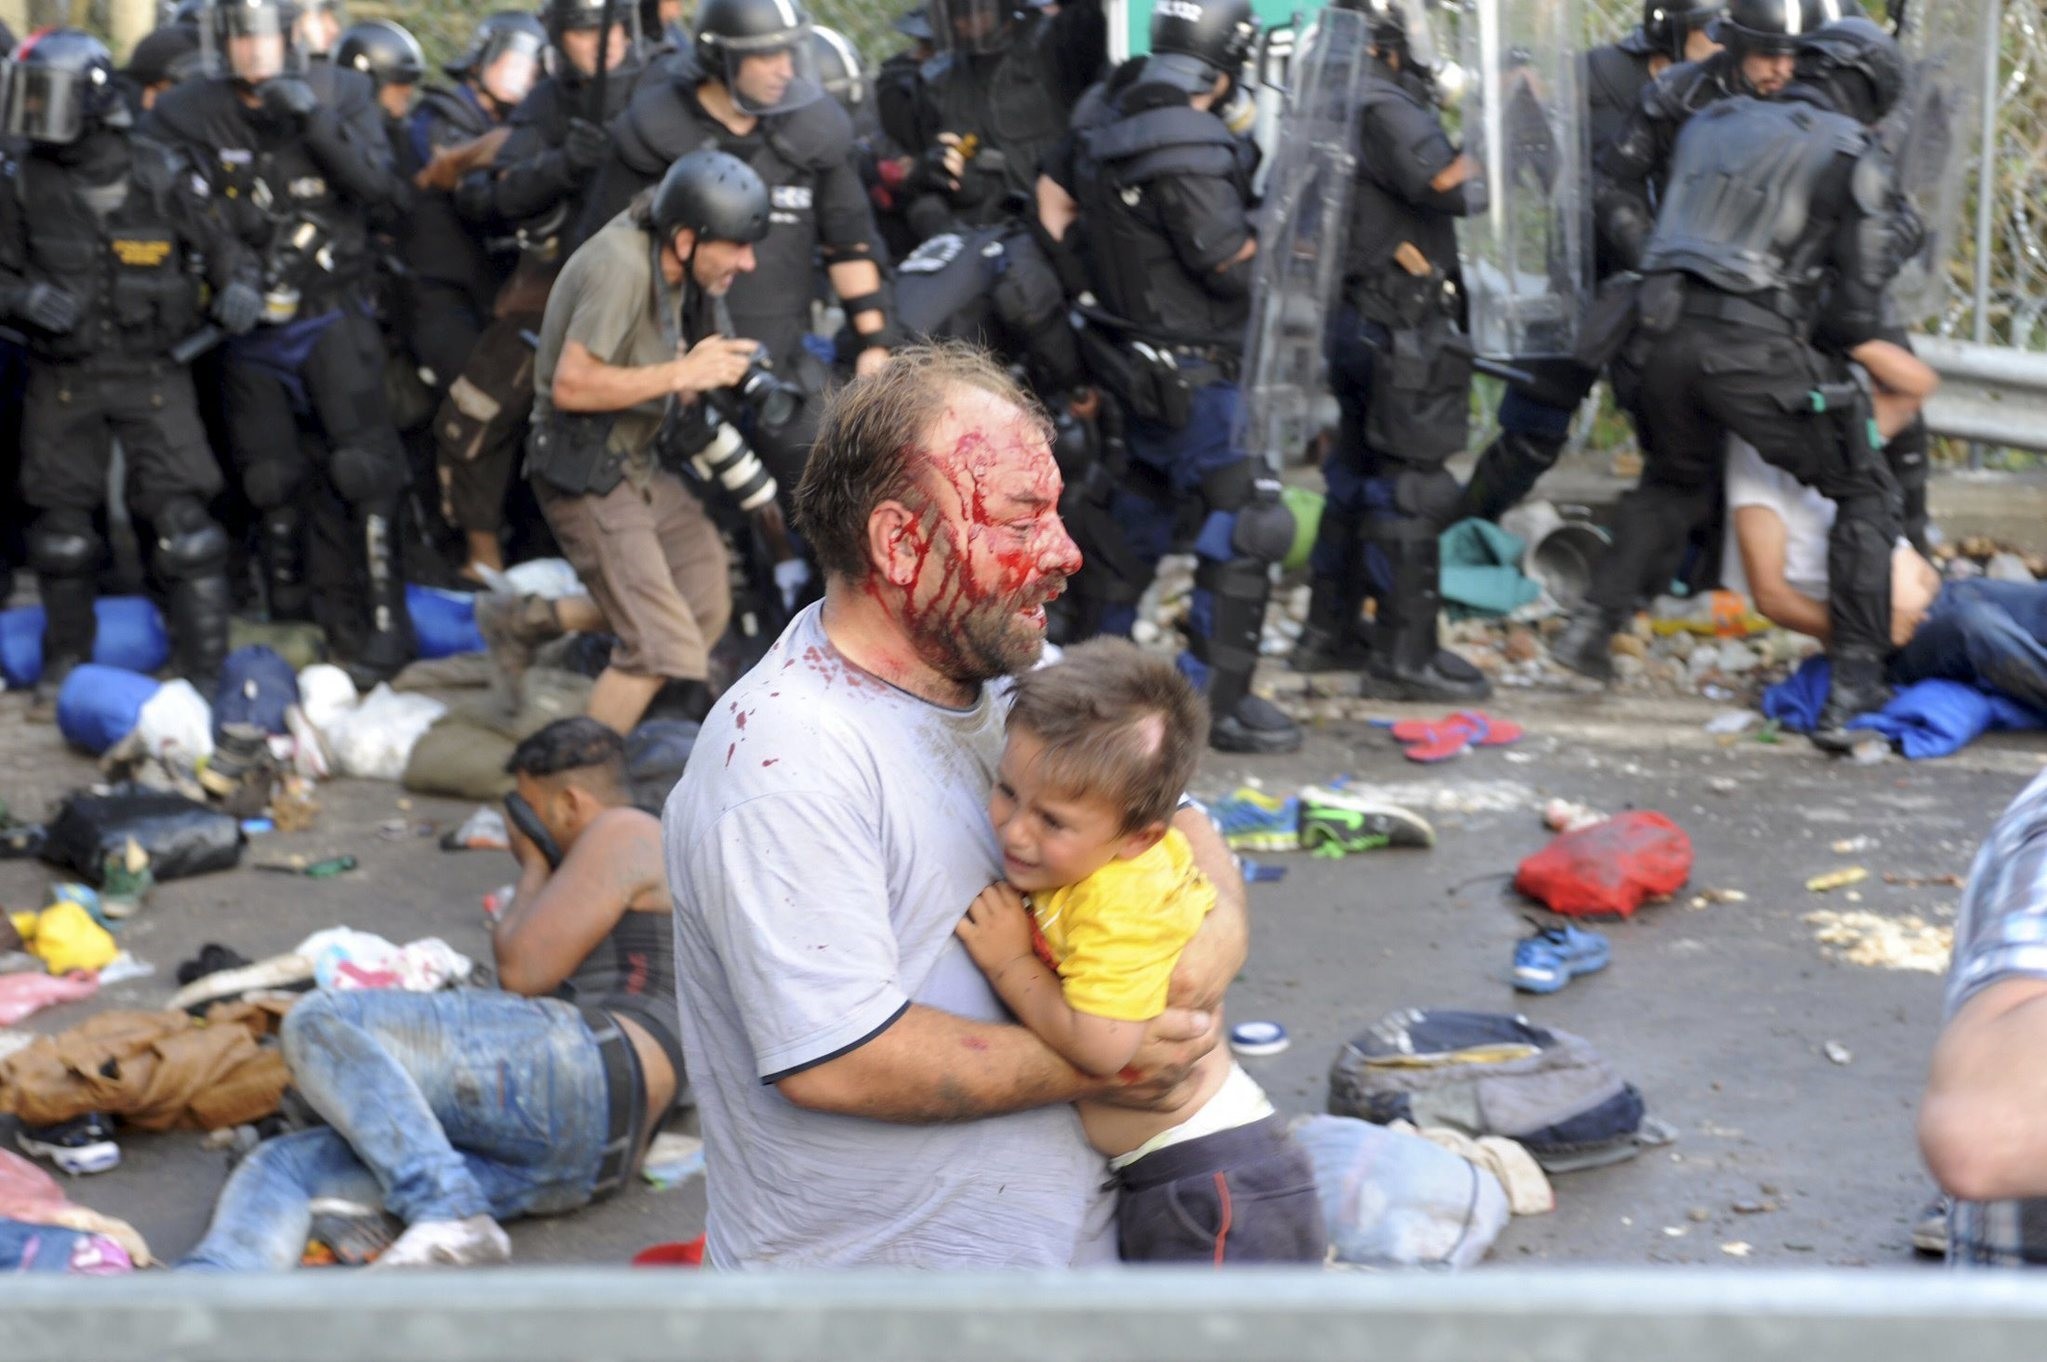 An injured migrant carries a child during clashes with Hungarian riot police at the border crossing with Serbia in Roszke, Hungary September 16, 2015. (Reuters Photo)